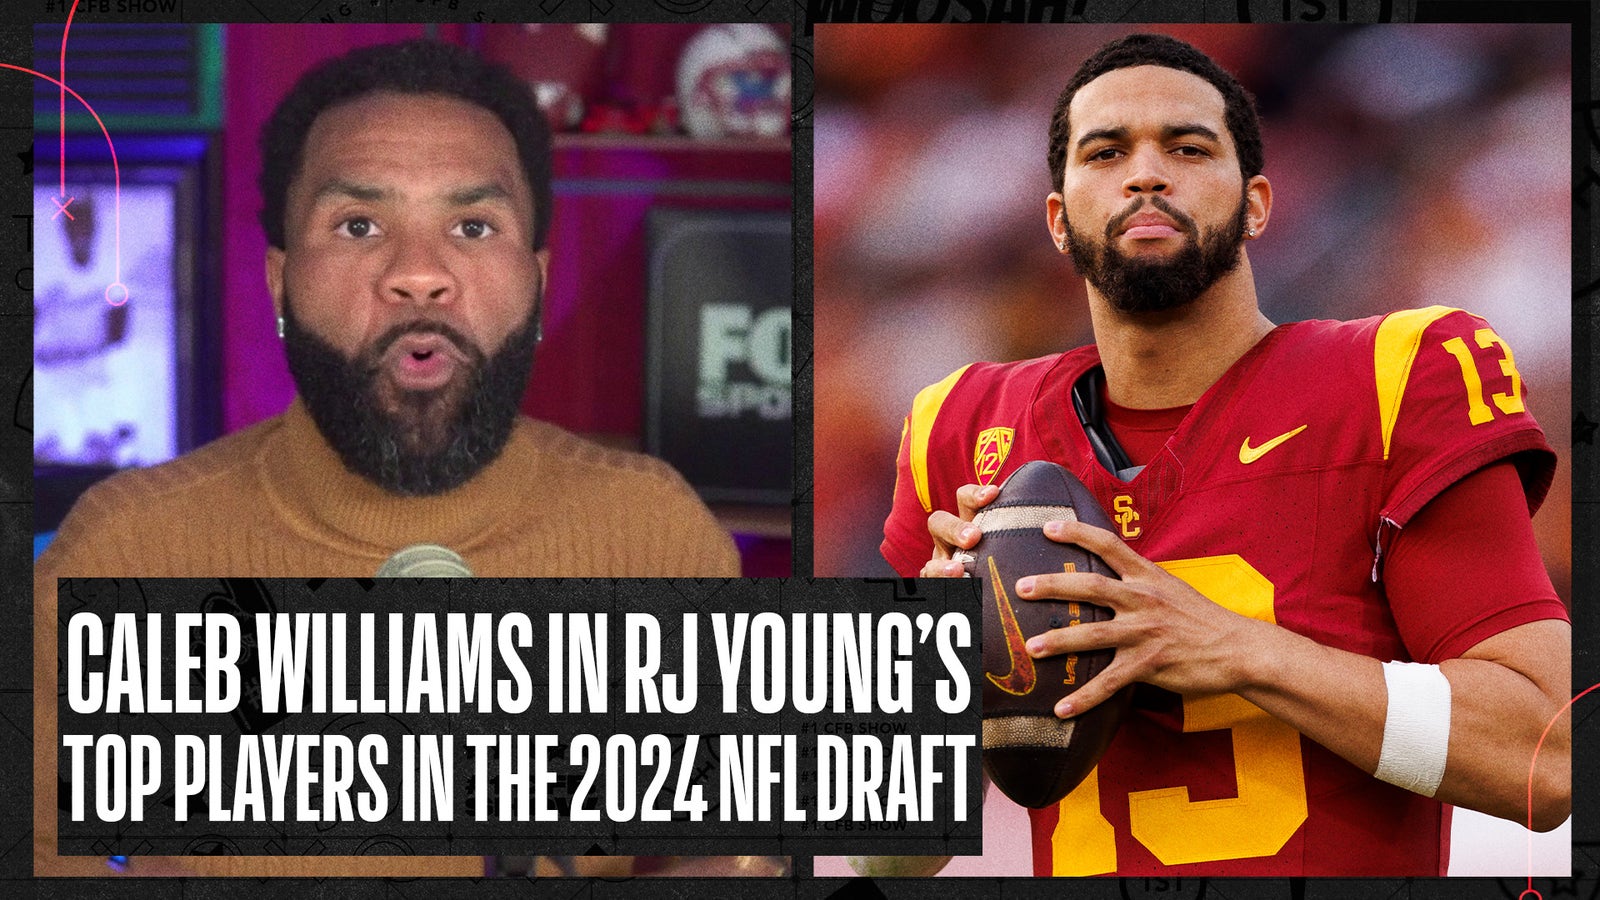 Caleb Williams, Marvin Harrison Jr. among RJ Young's top-5 players in NFL Draft